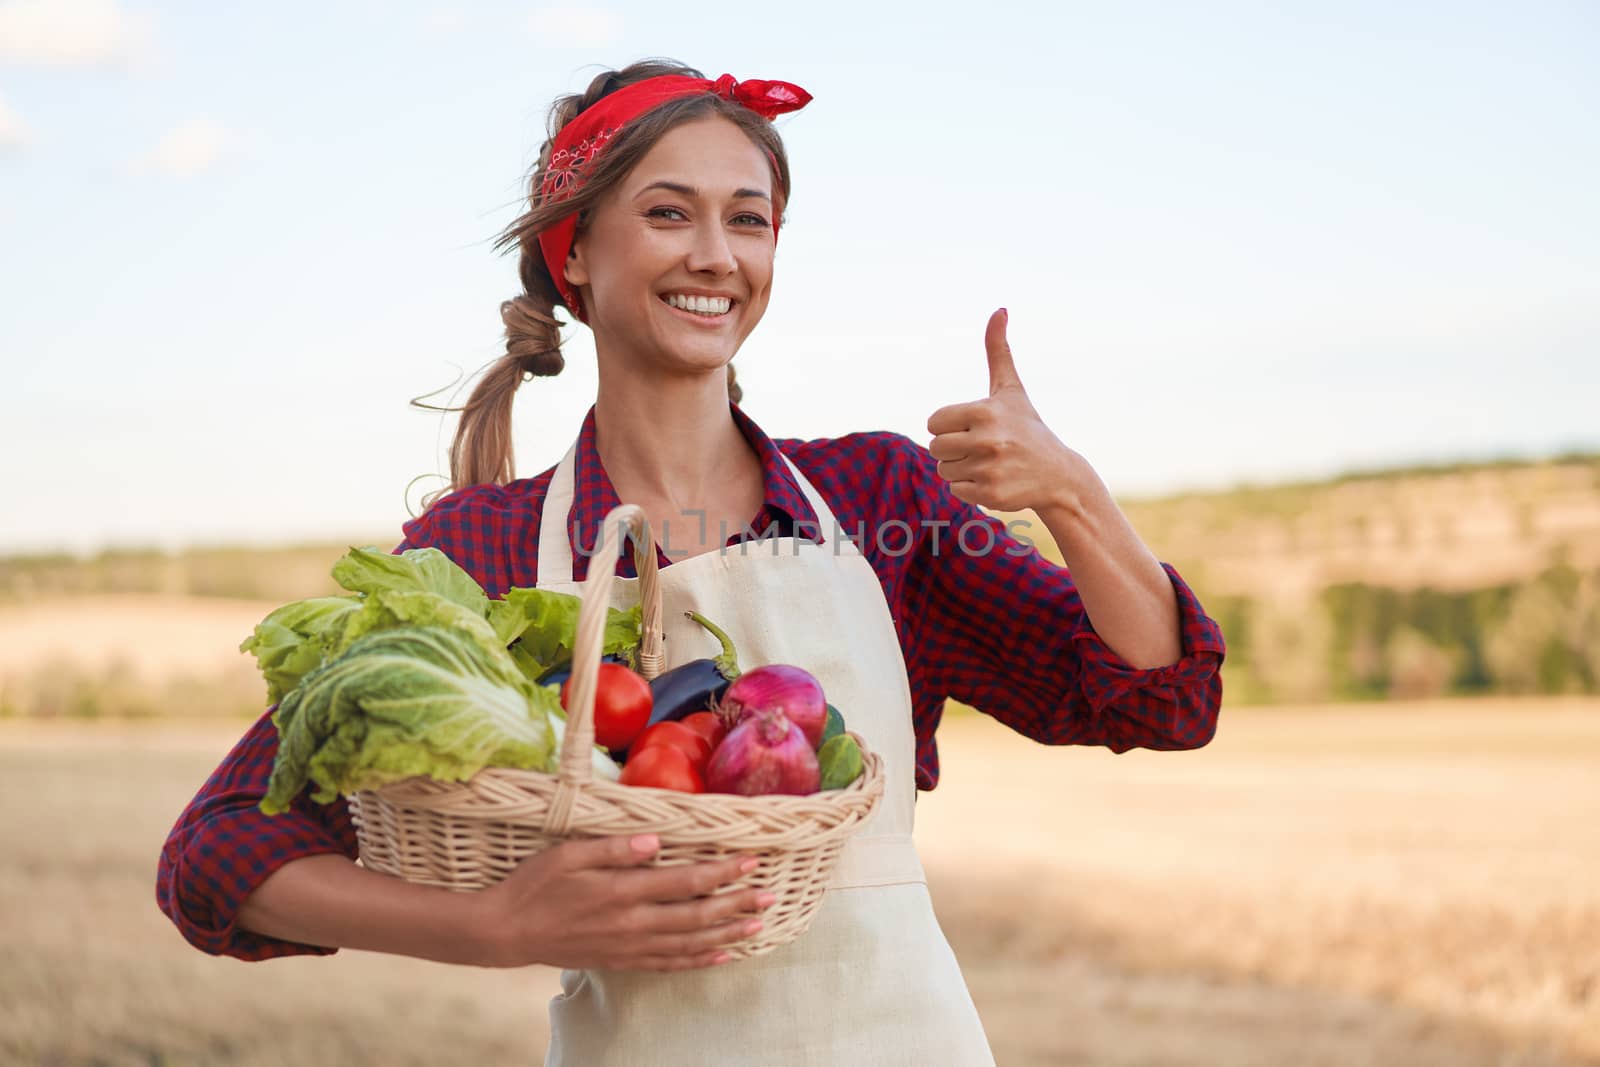 Woman farmer showing thumbs up holding basket vegetable onion tomato salad cucumber standing farmland smiling Female agronomist specialist farming agribusiness Pretty girl dressed red checkered shirt